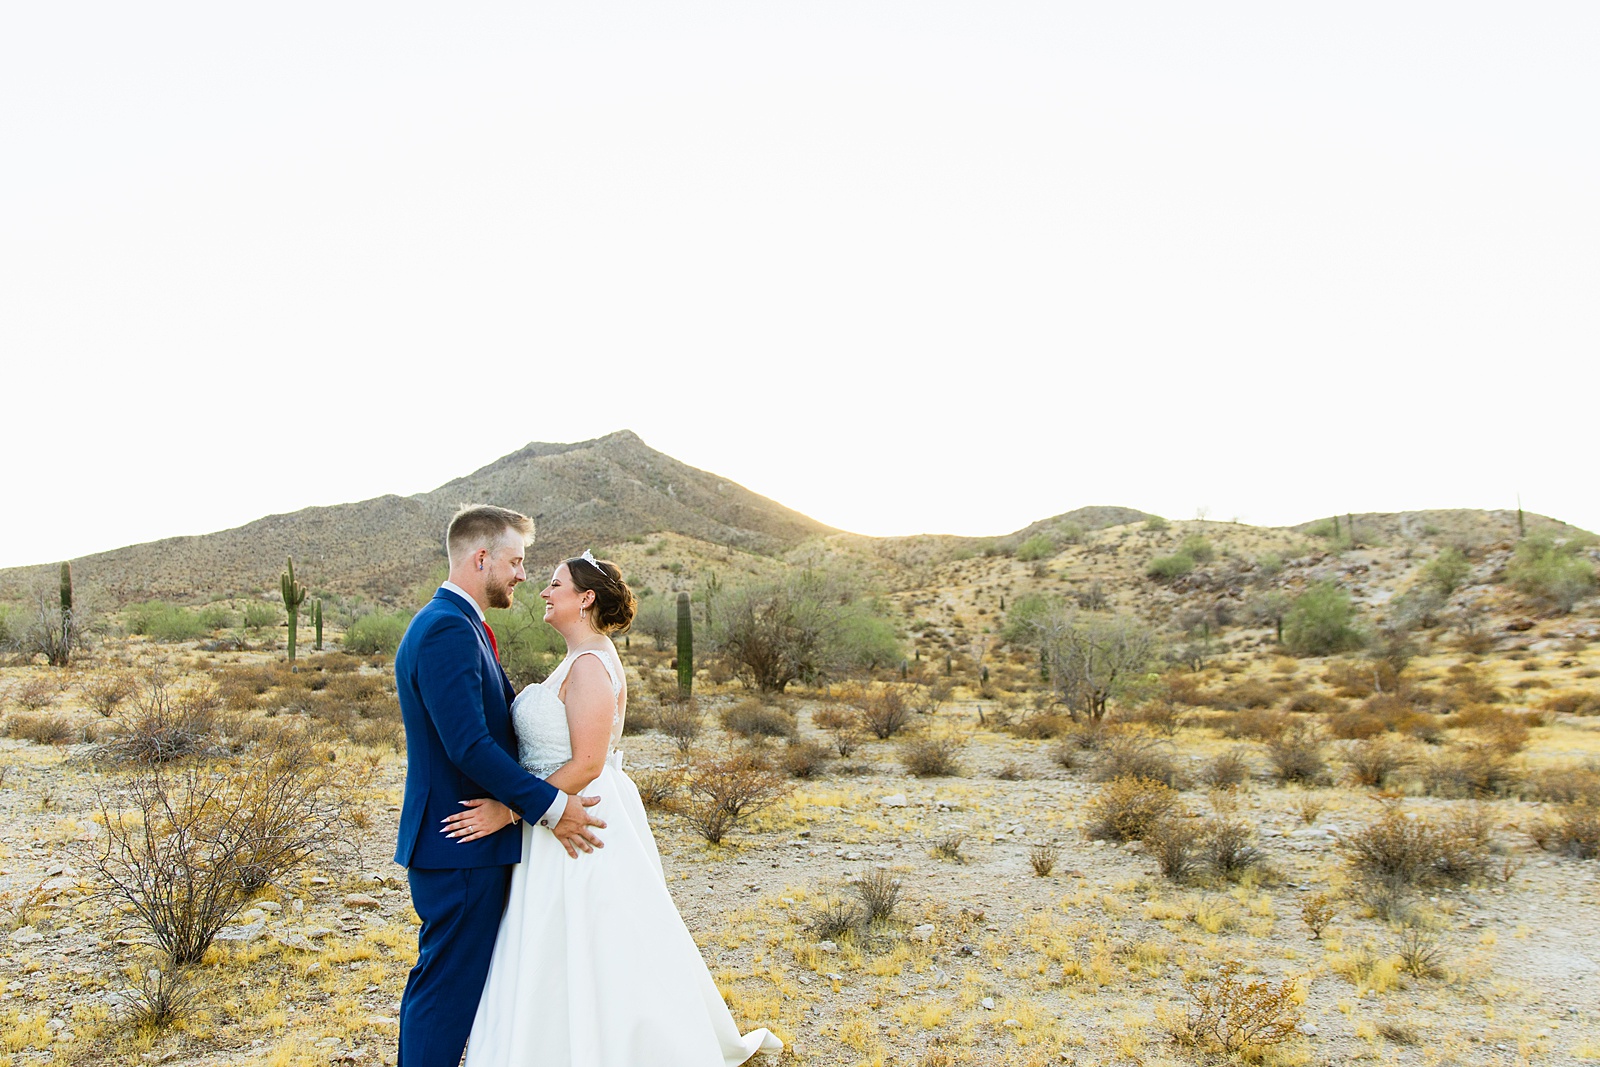 Bride and groom looking at each other during their intimate desert wedding by Phoenix wedding photographer Juniper and Co Photography.